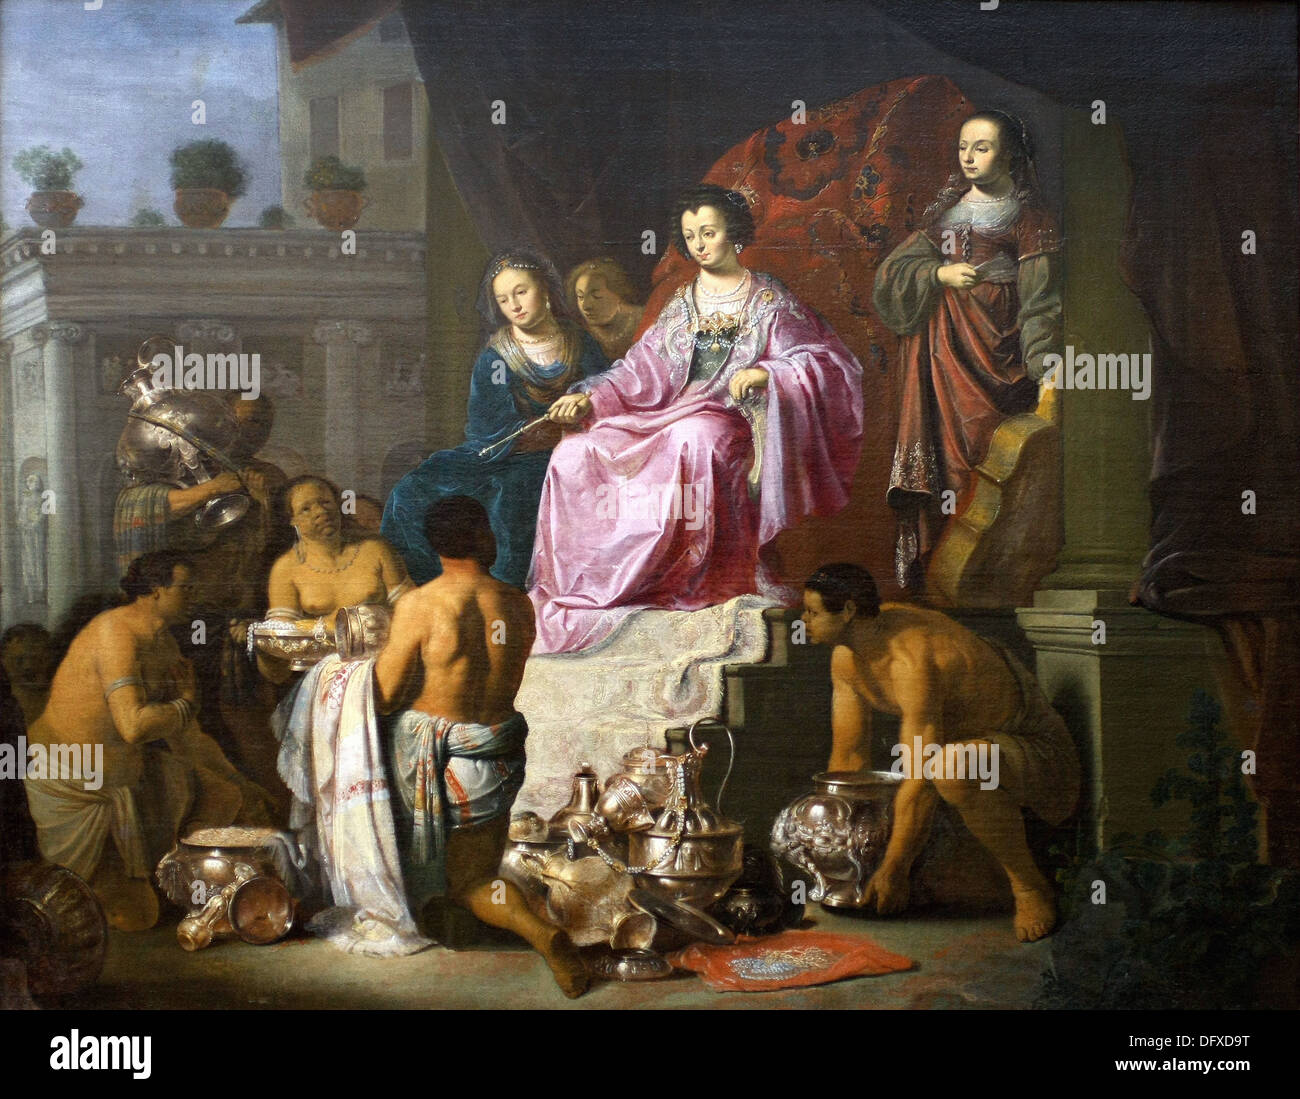 Willem de POORTER - Allegory of colonial power - 1638 - Museum of Fine Arts - Budapest, Hungary. Stock Photo